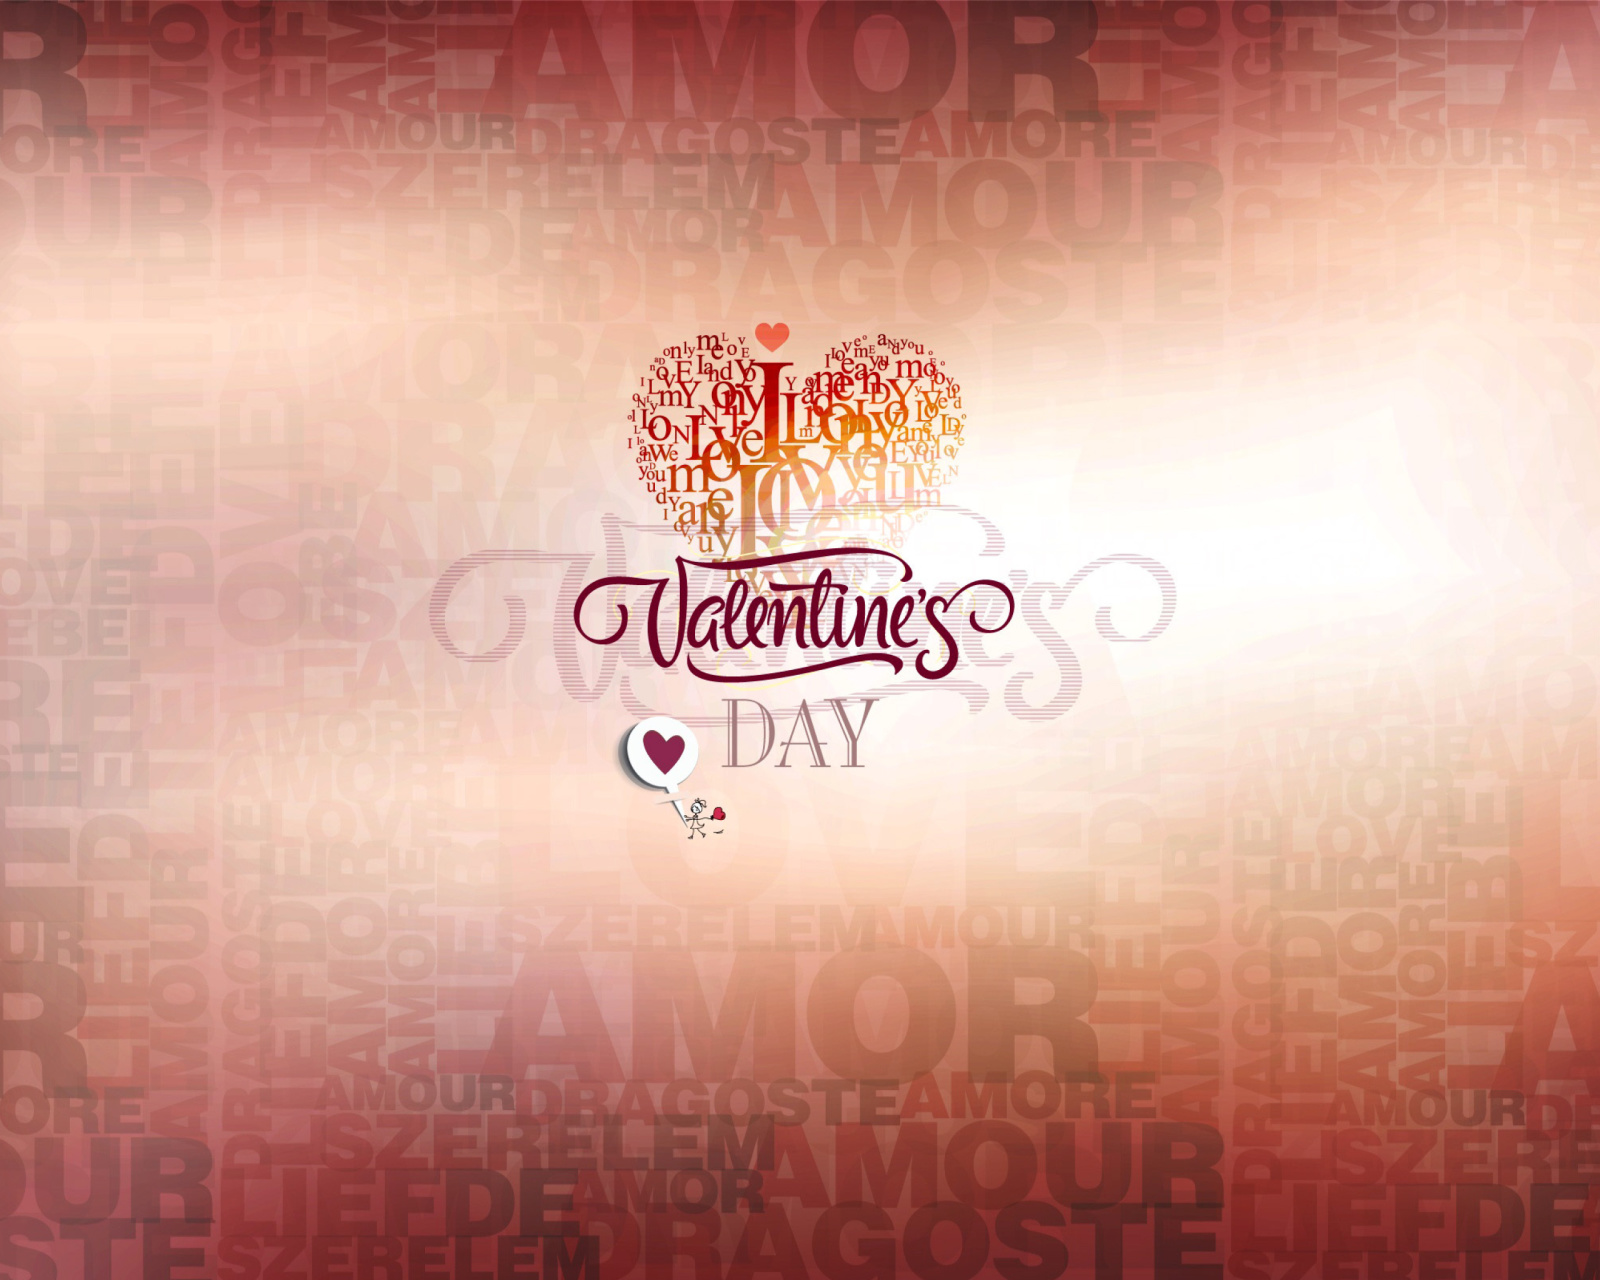 February 14 Valentines Day wallpaper 1600x1280